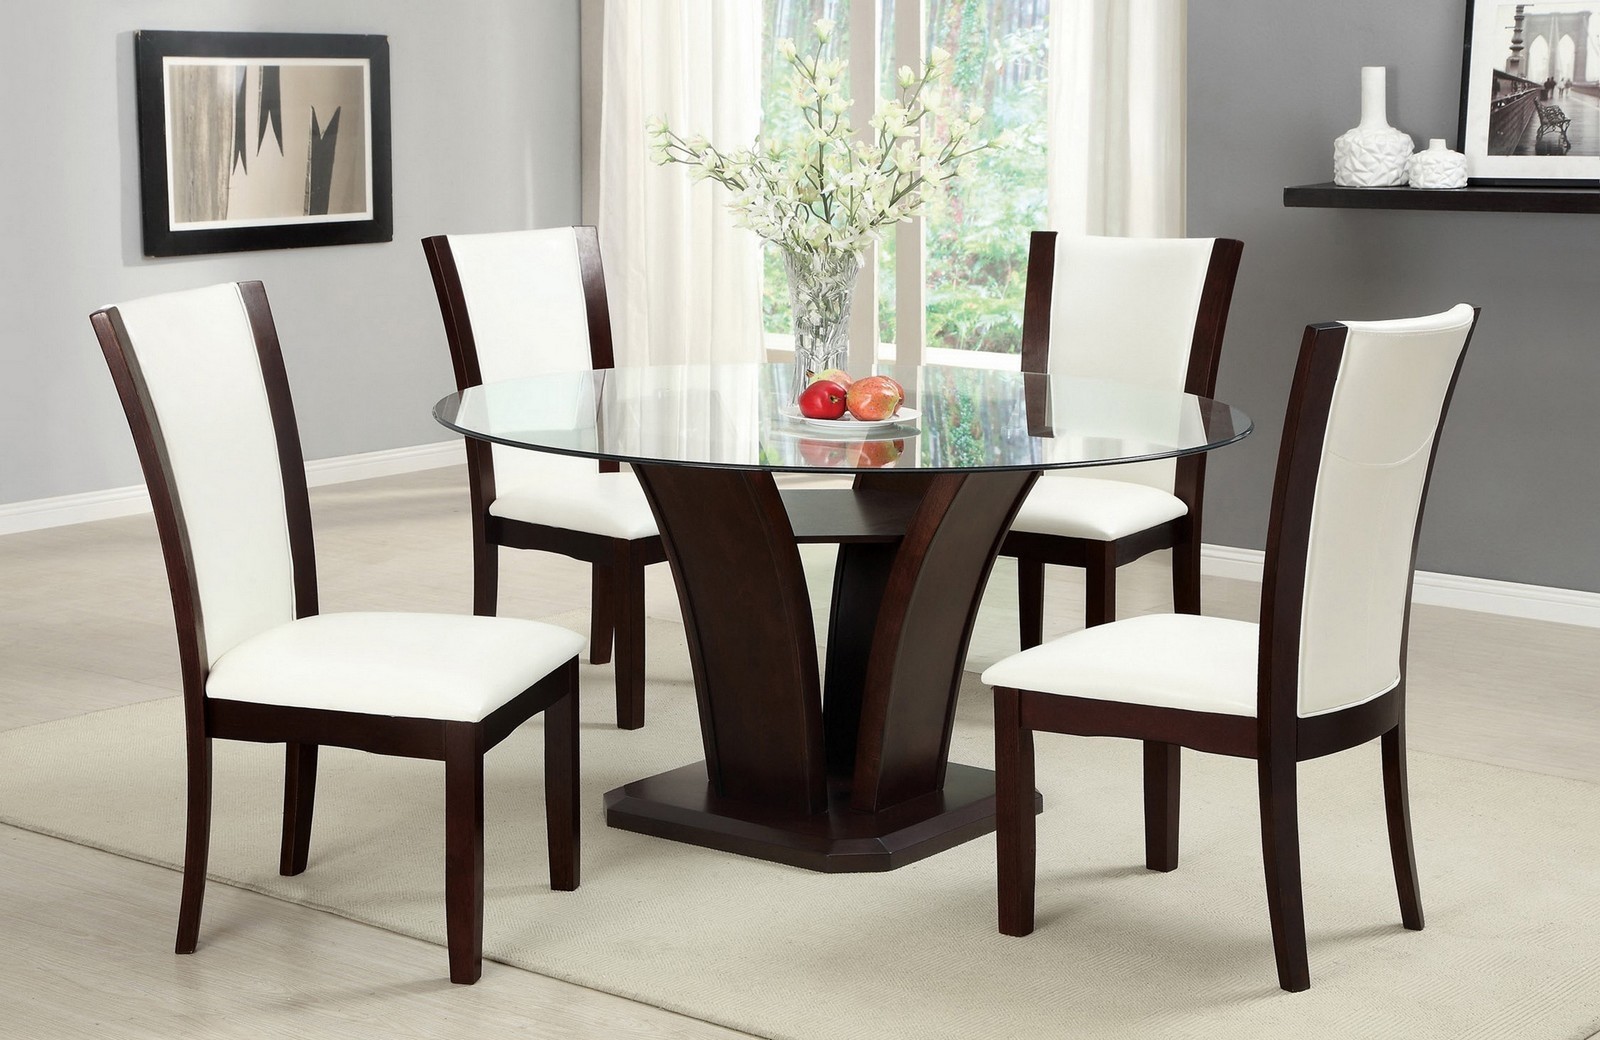 Dining Table Set Dark Cherry Round Glass Ivory White Leatherette Home Kitchen F